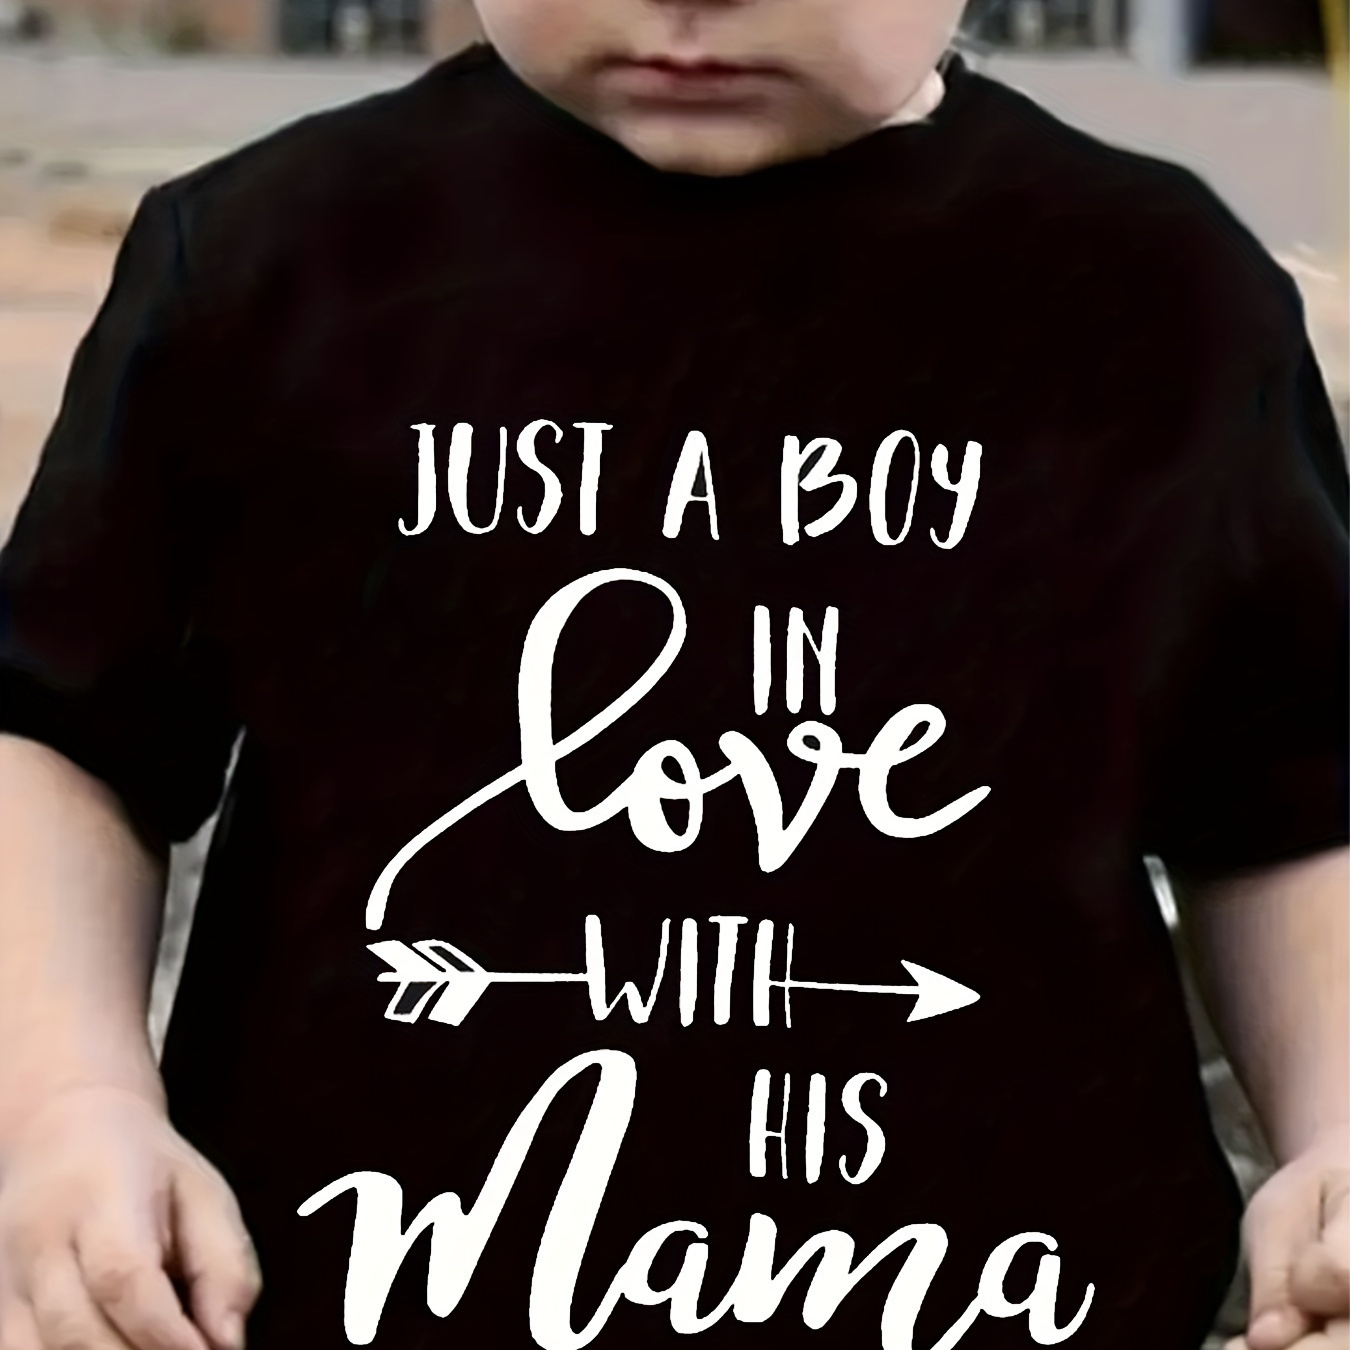 

Just A Boy In Love With His Mama Letter Print Boys Casual Short Sleeve T-shirts - Comfortable & Stylish Tops For Summer - Ideal Gift For Your Fashionistas